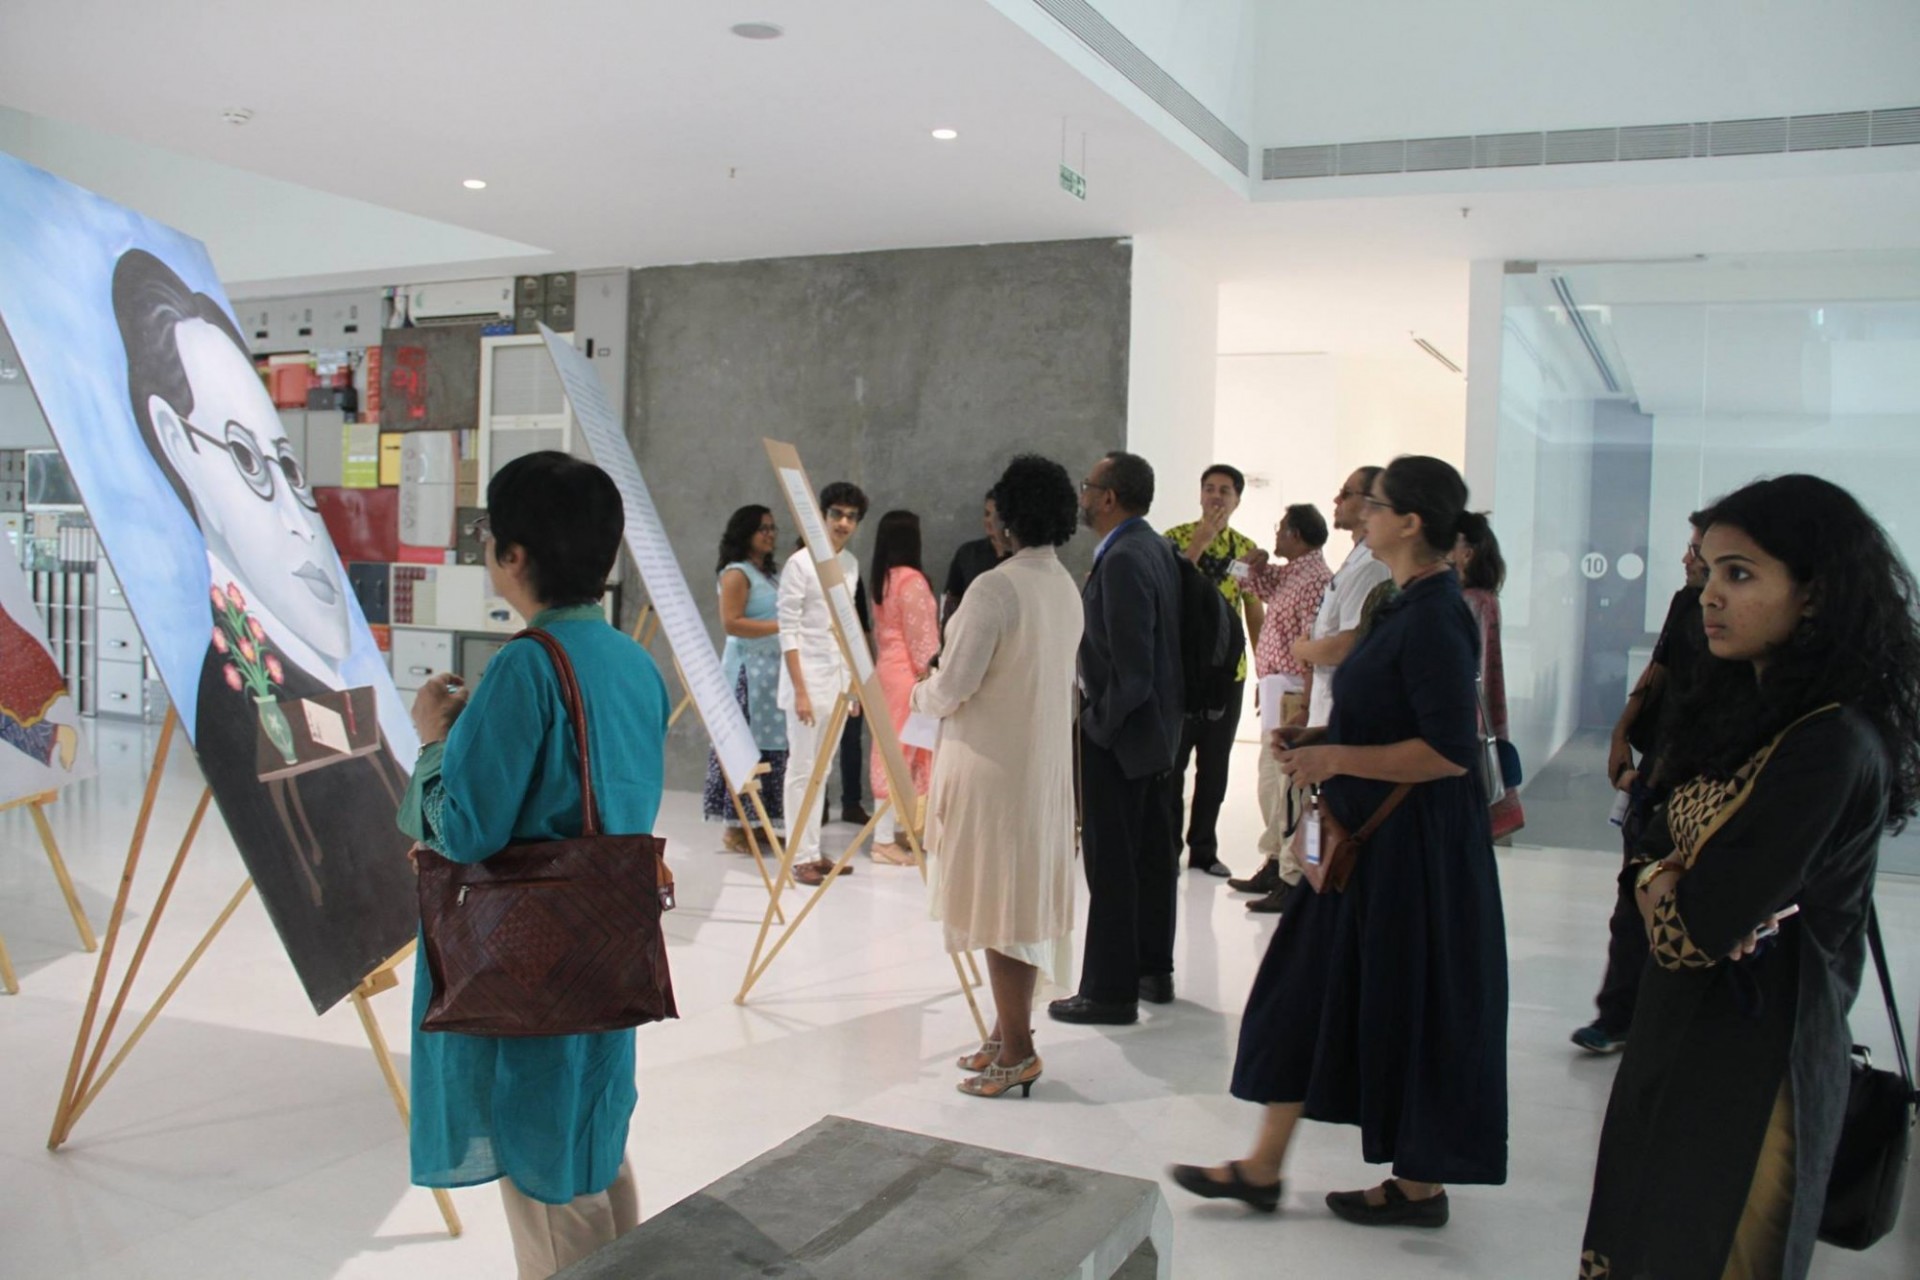 guests at an art exhibit in the Mumbai Center